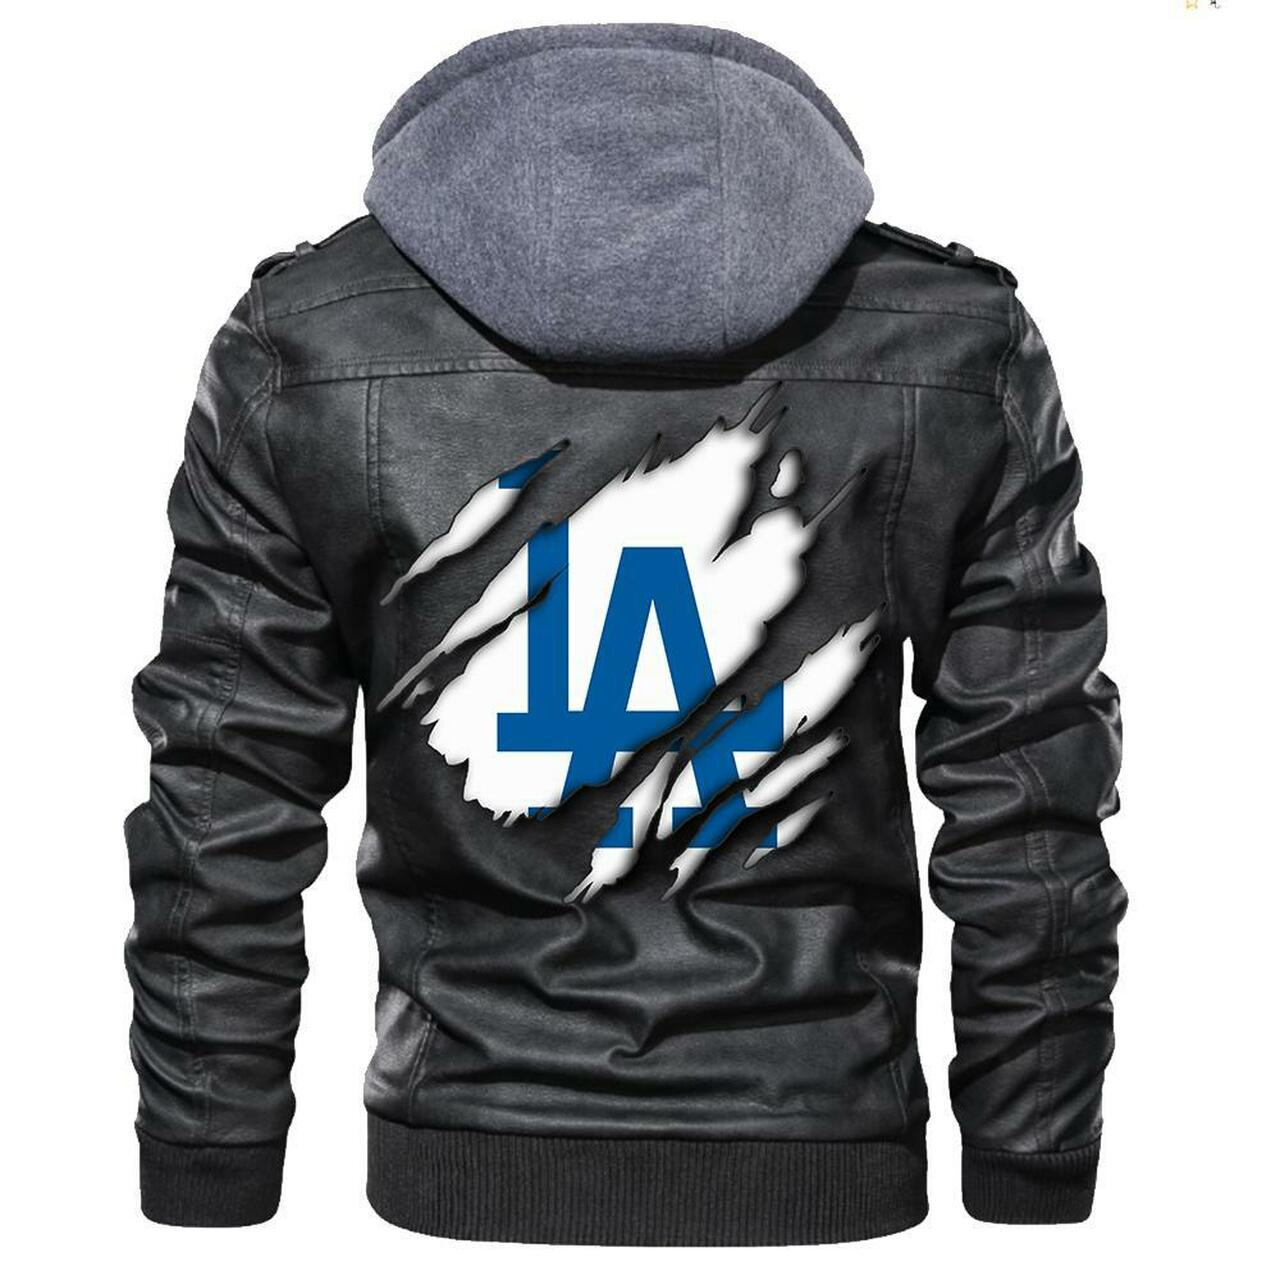 This leather Jacket will look great on you and make you stand out from the crowd 395